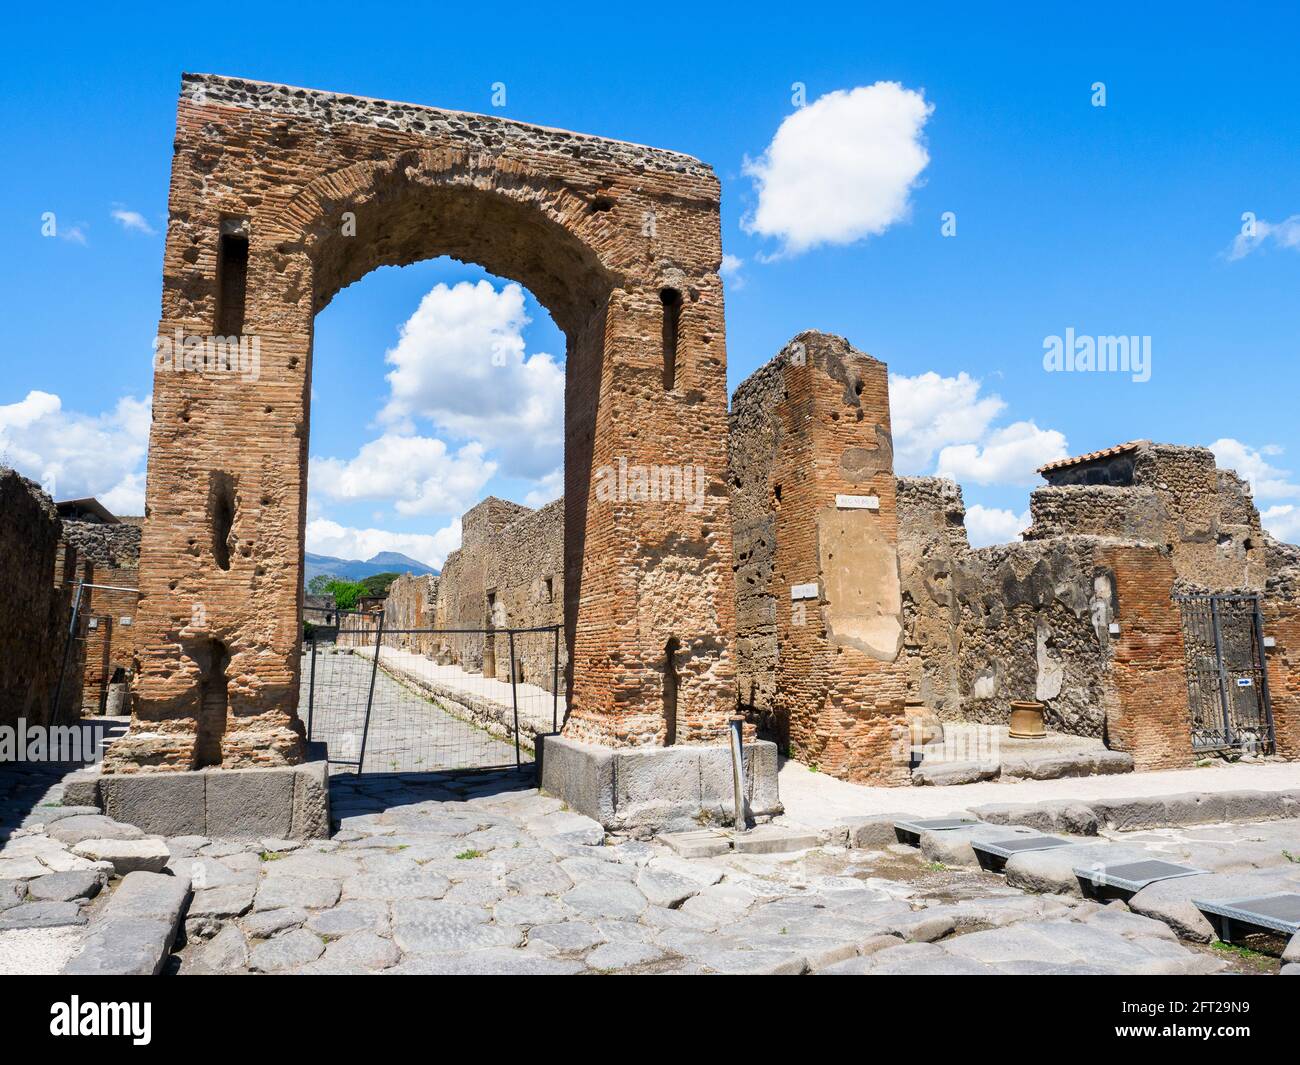 Honorary arch of Caligula - Pompeii archaeological site, Italy Stock Photo